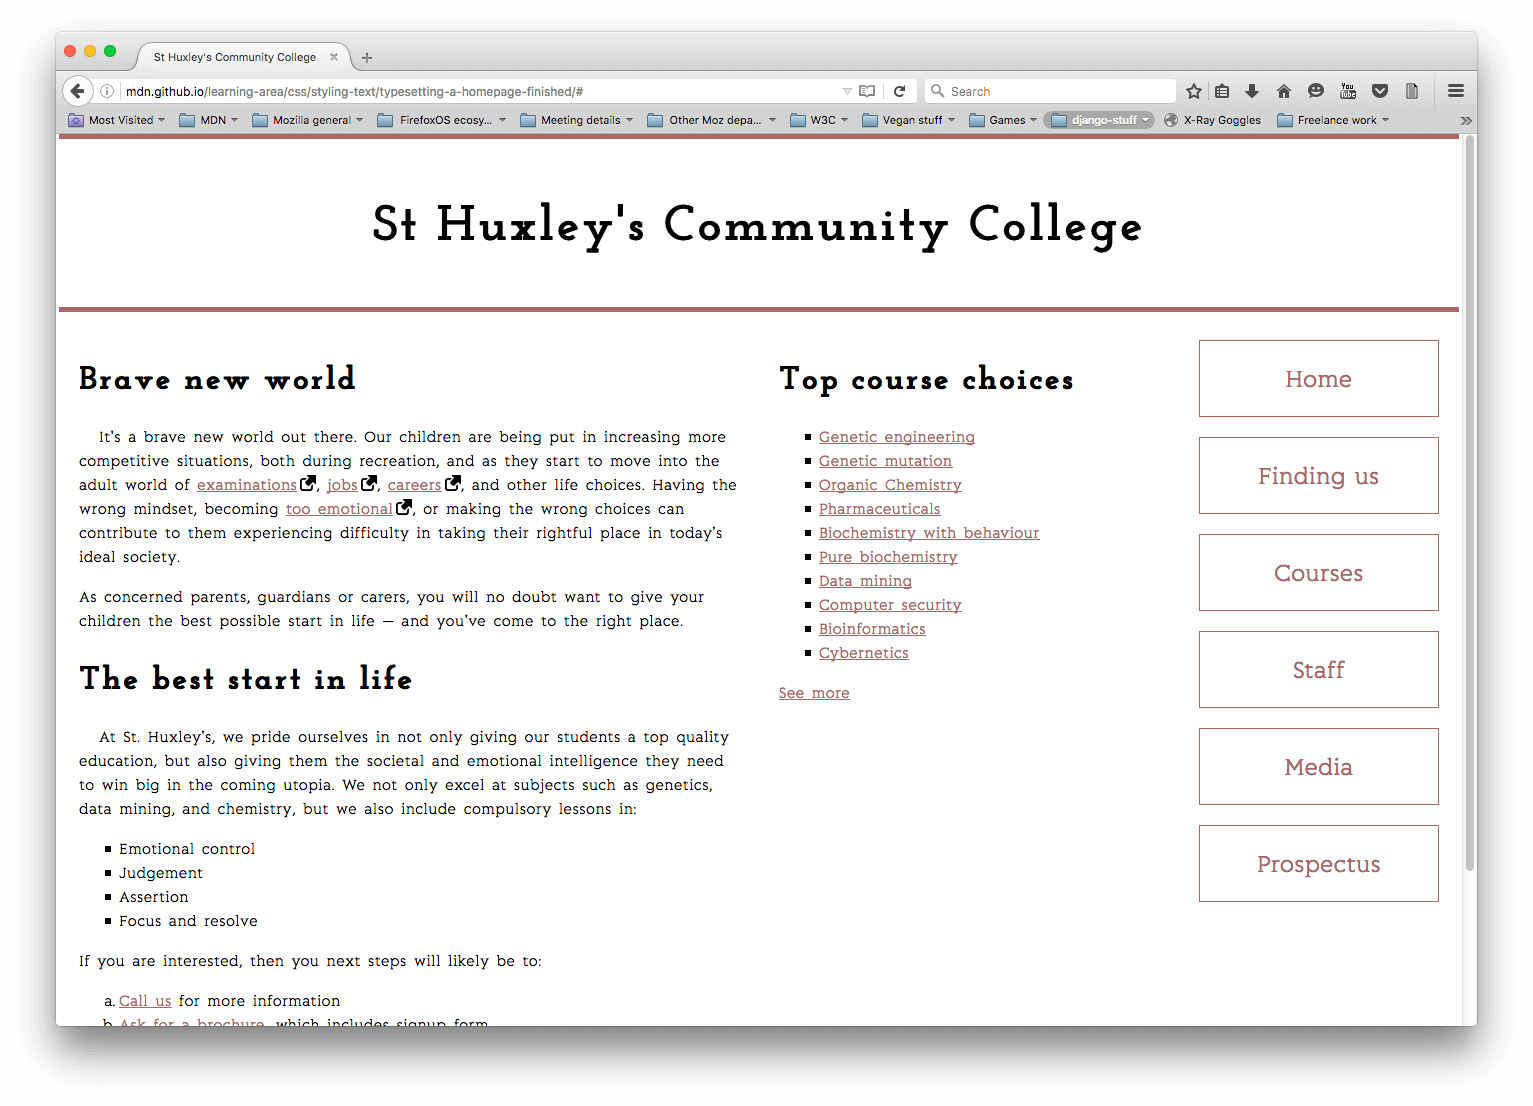 A screenshot of the finished design of the 'Community school website homepage' text styling assessment. The heading reads 'St Huxley's Community College'. There is a red line separating the banner header from the content. The main content has three columns. The first, widest column has a few paragraphs which imply the importance of college to Students. The second column has a list of links to the top course choices offered by the college. The third column contains a vertical navigation bar with rectangular outlined button links to different sections of the website.